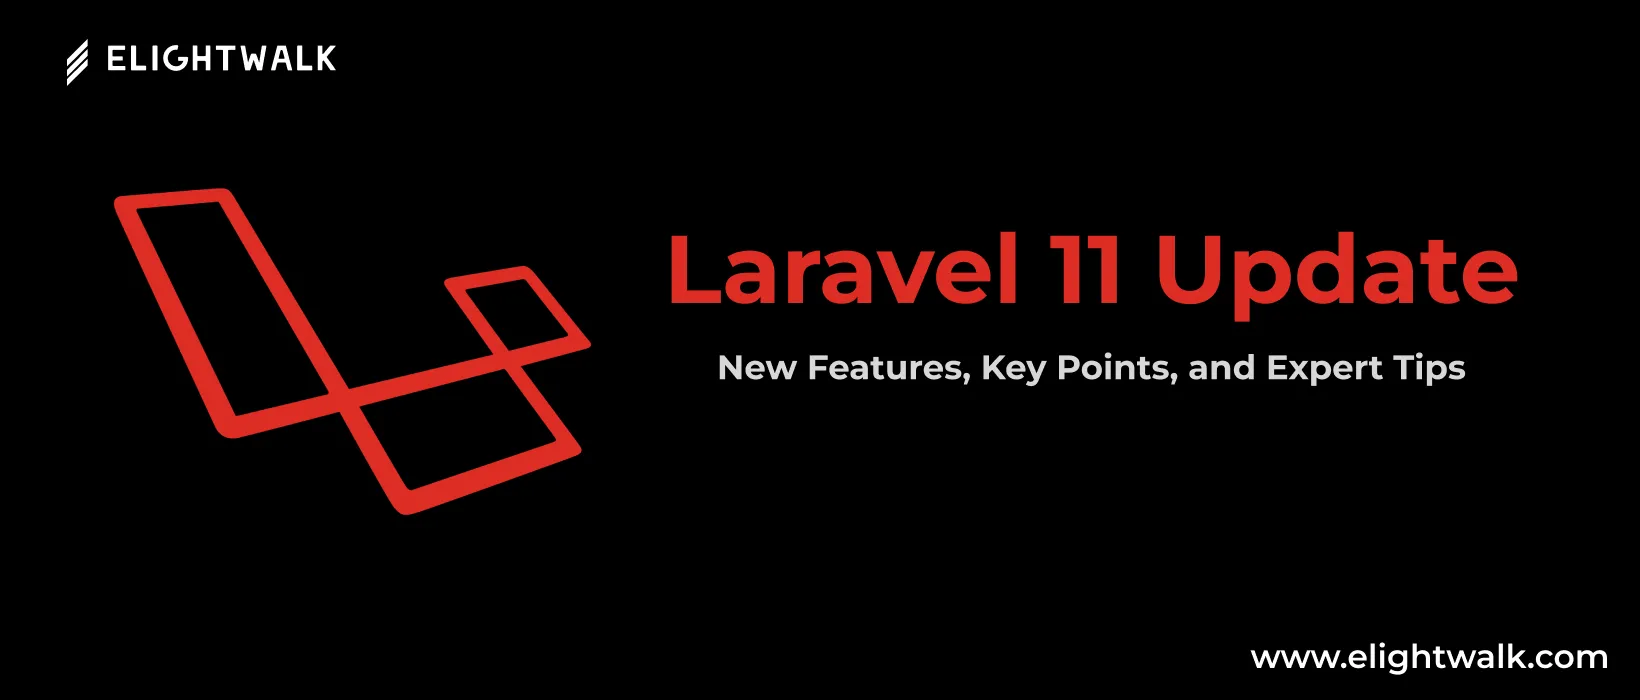 What's New in Larvel 11? New Update, Features & Expert Tips